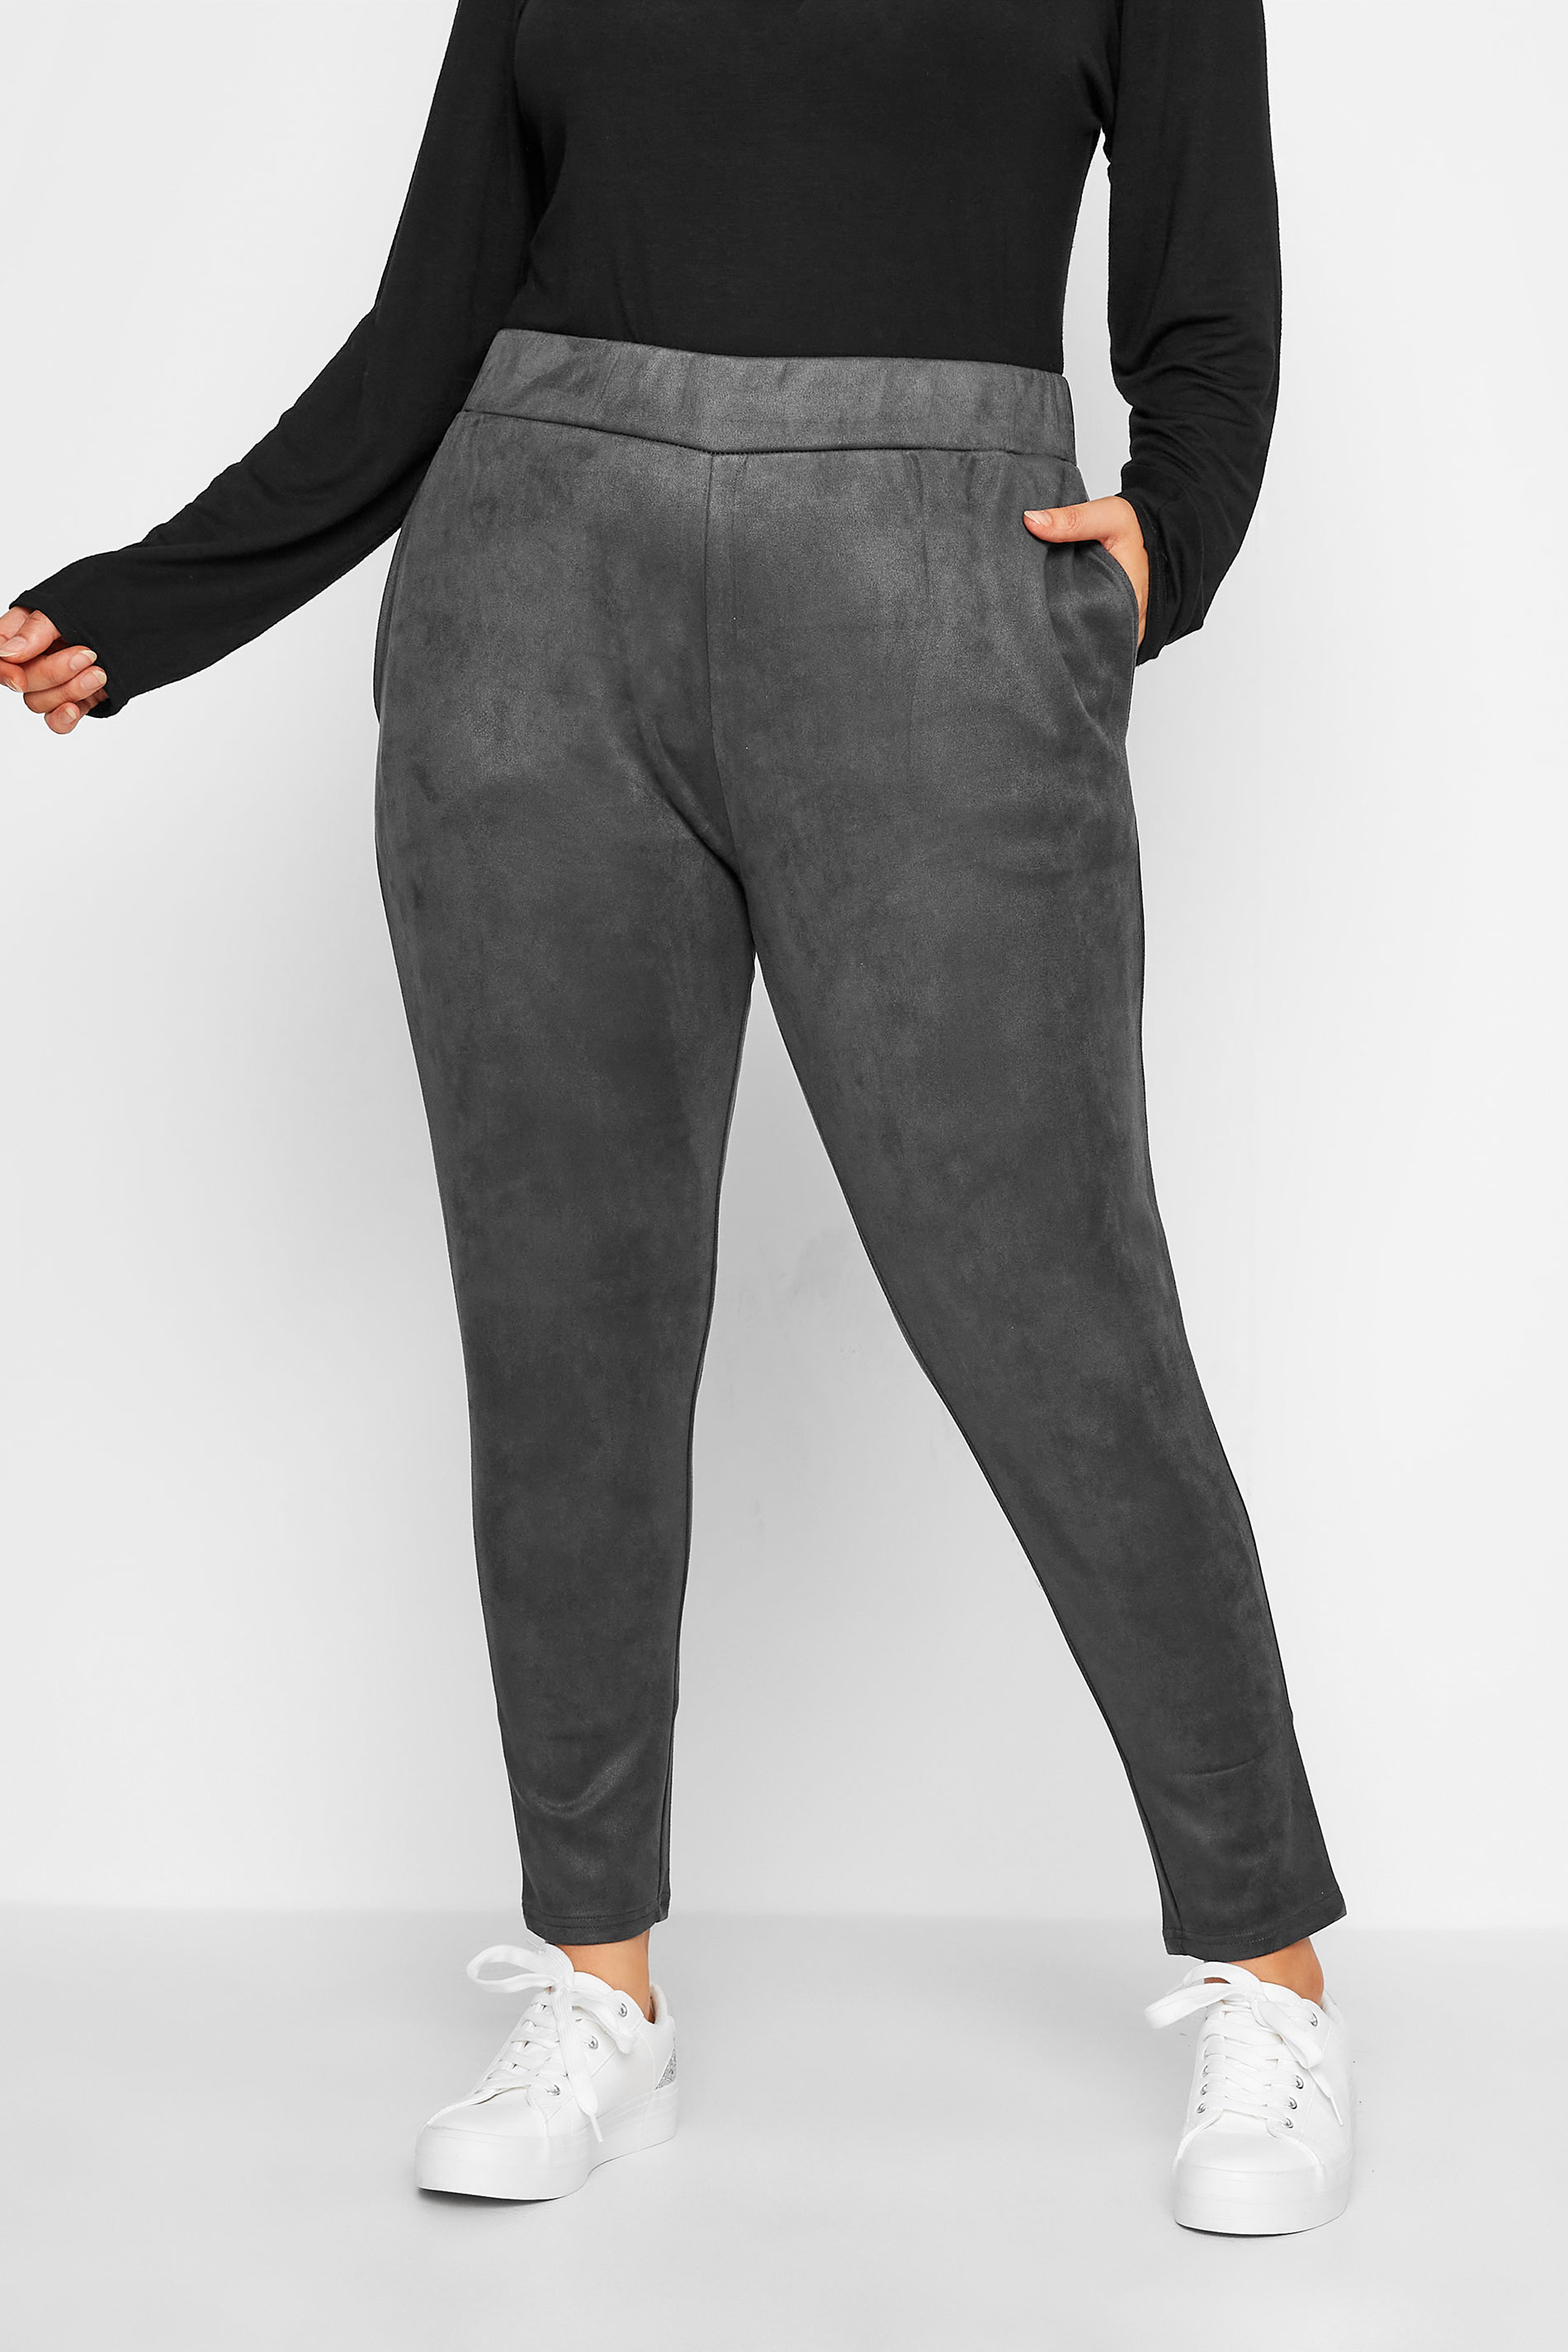 Plus Size Grey Faux Suede Joggers | Yours Clothing 1